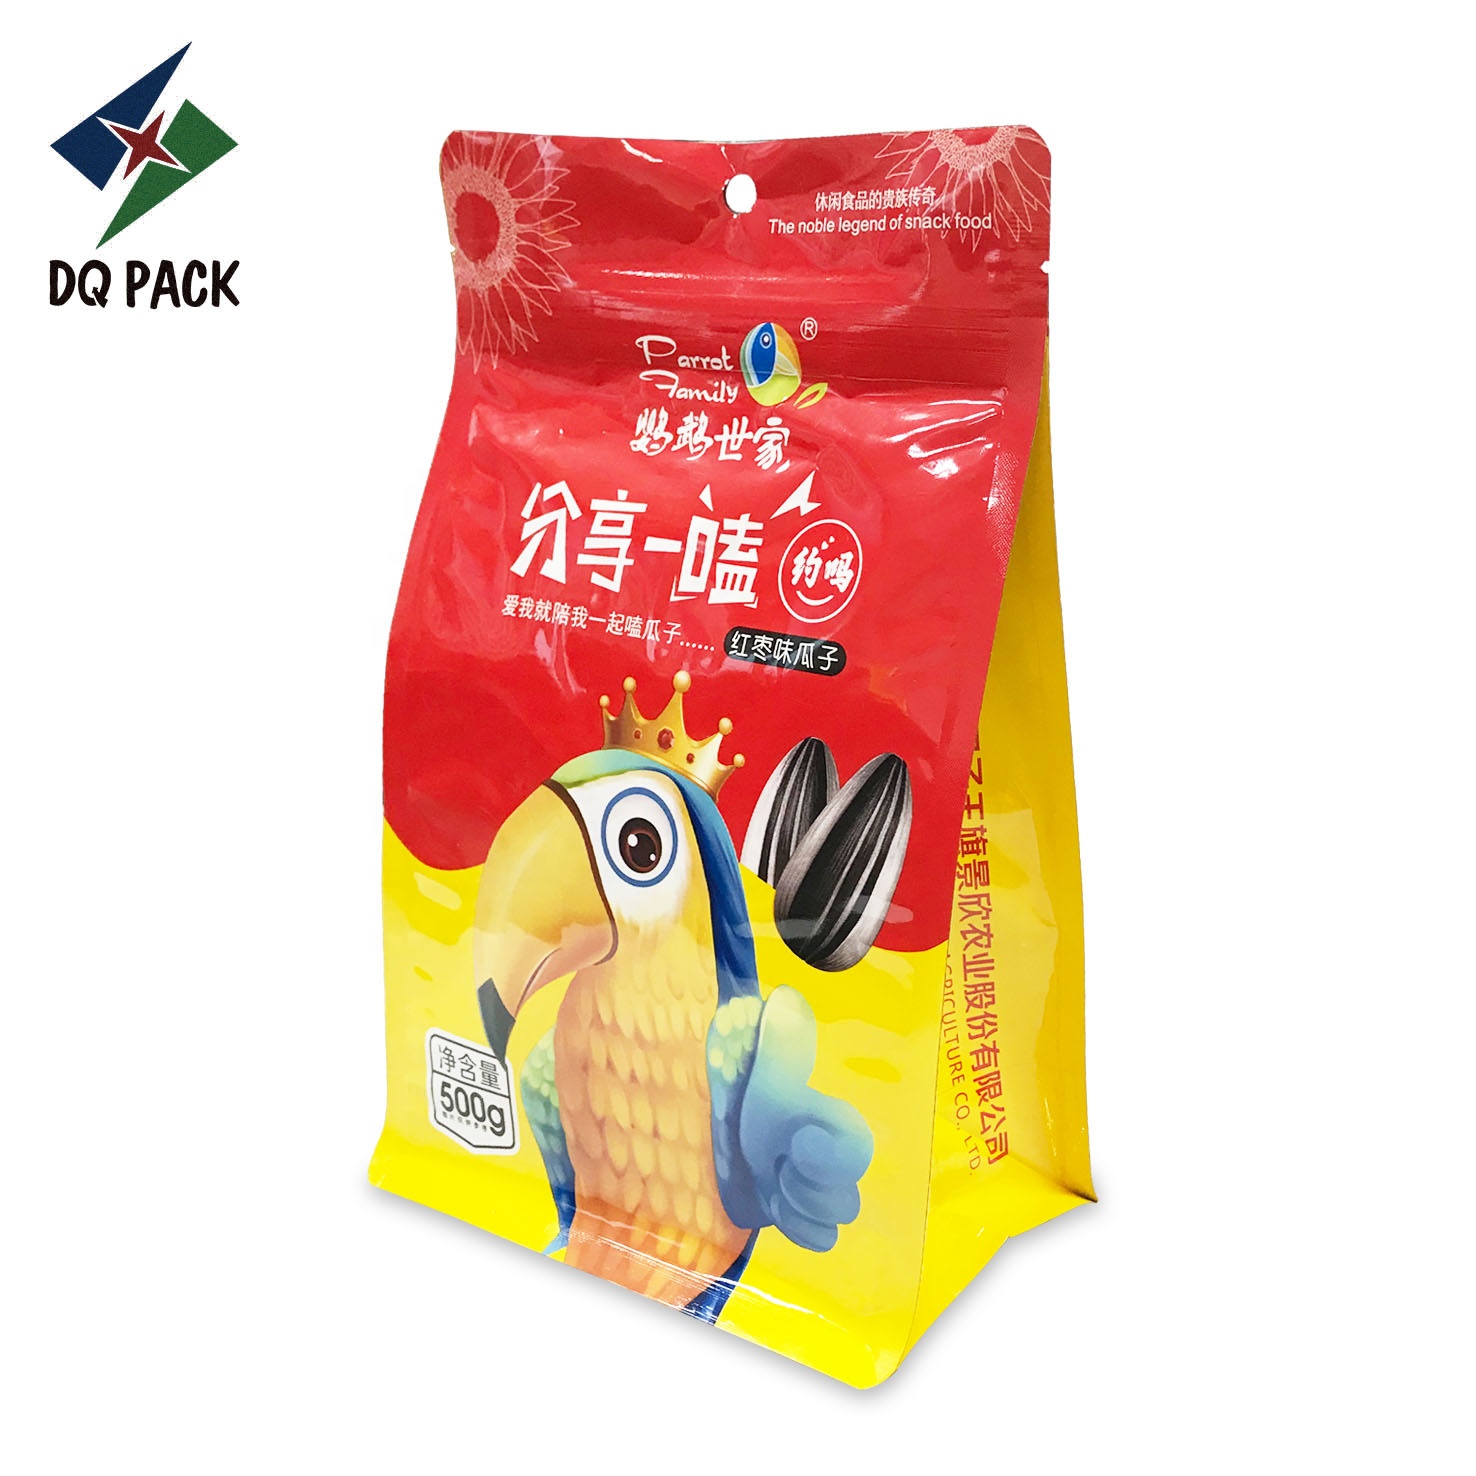 DQ PACK stand up customized printing zipper flat bottom pouch for sunseeds snack